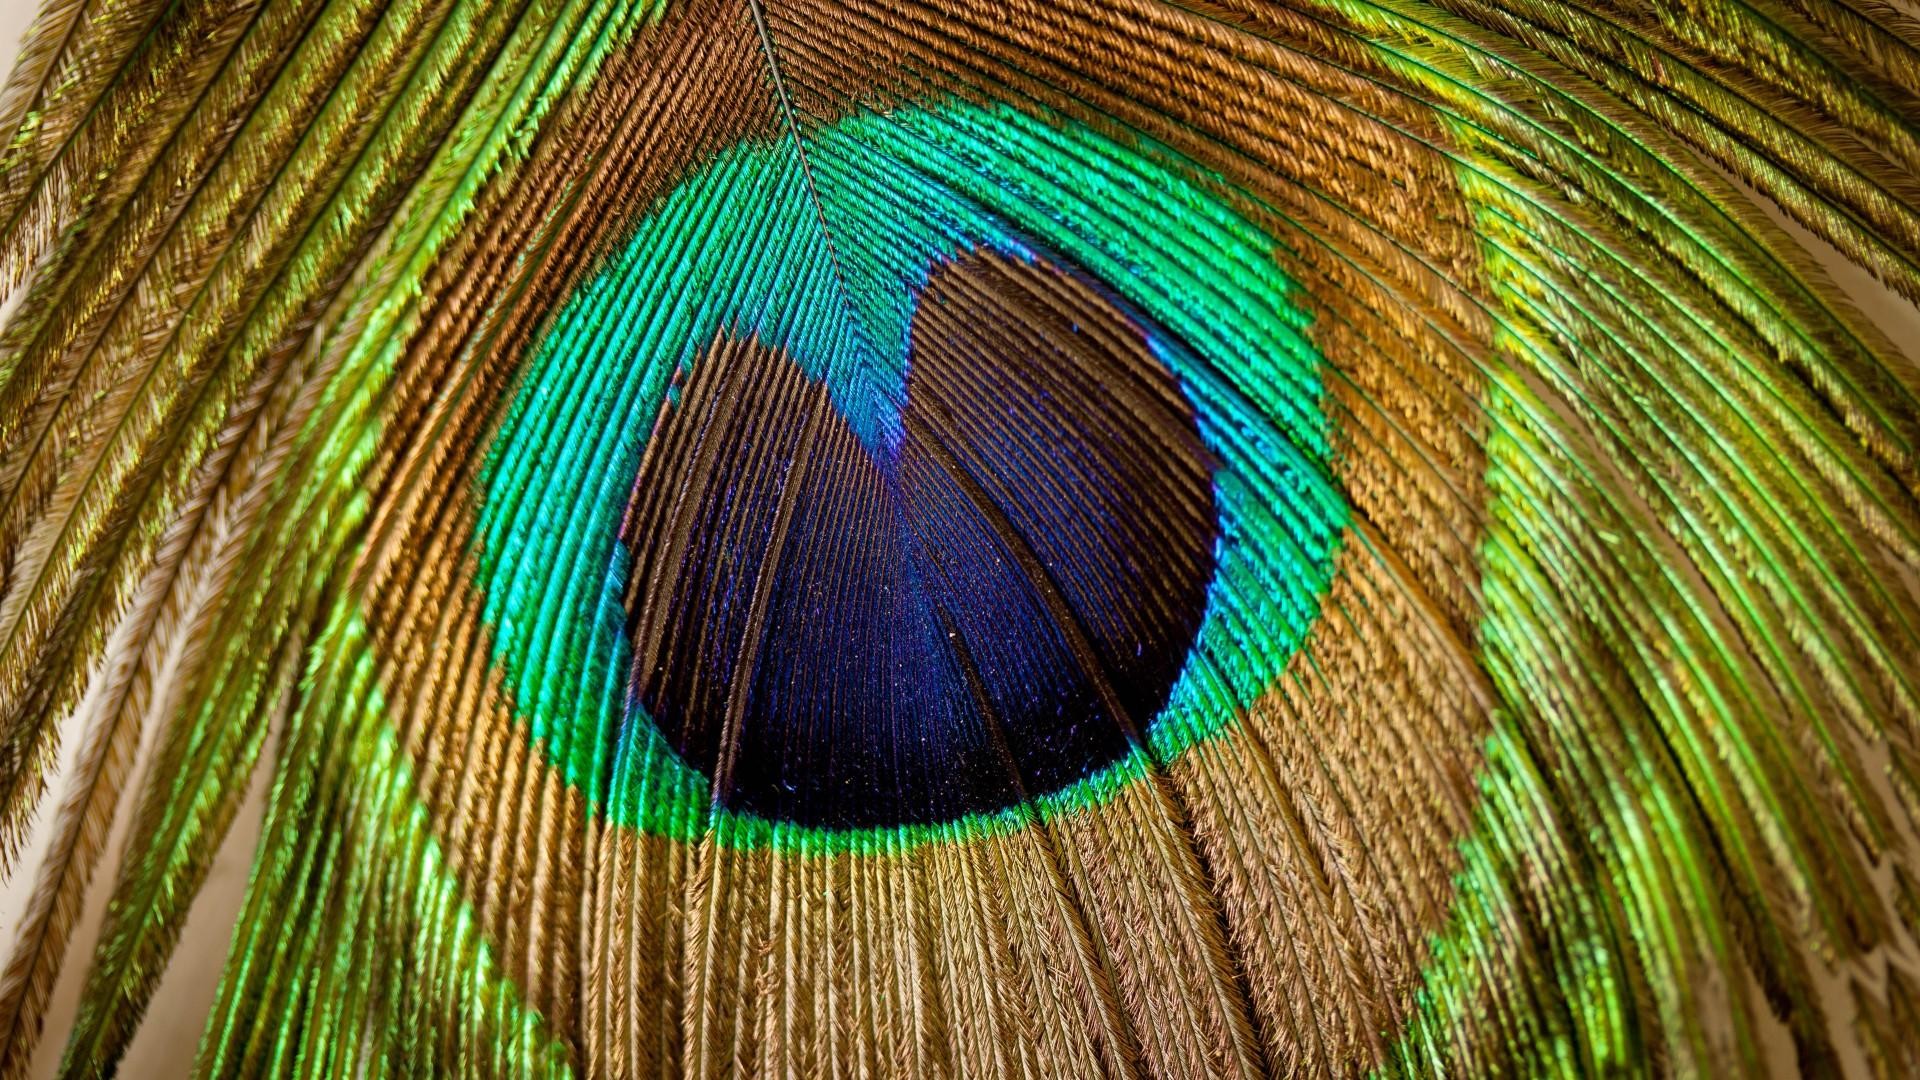 Wallpapers of Peacock Feathers HD 2018 ·① WallpaperTag